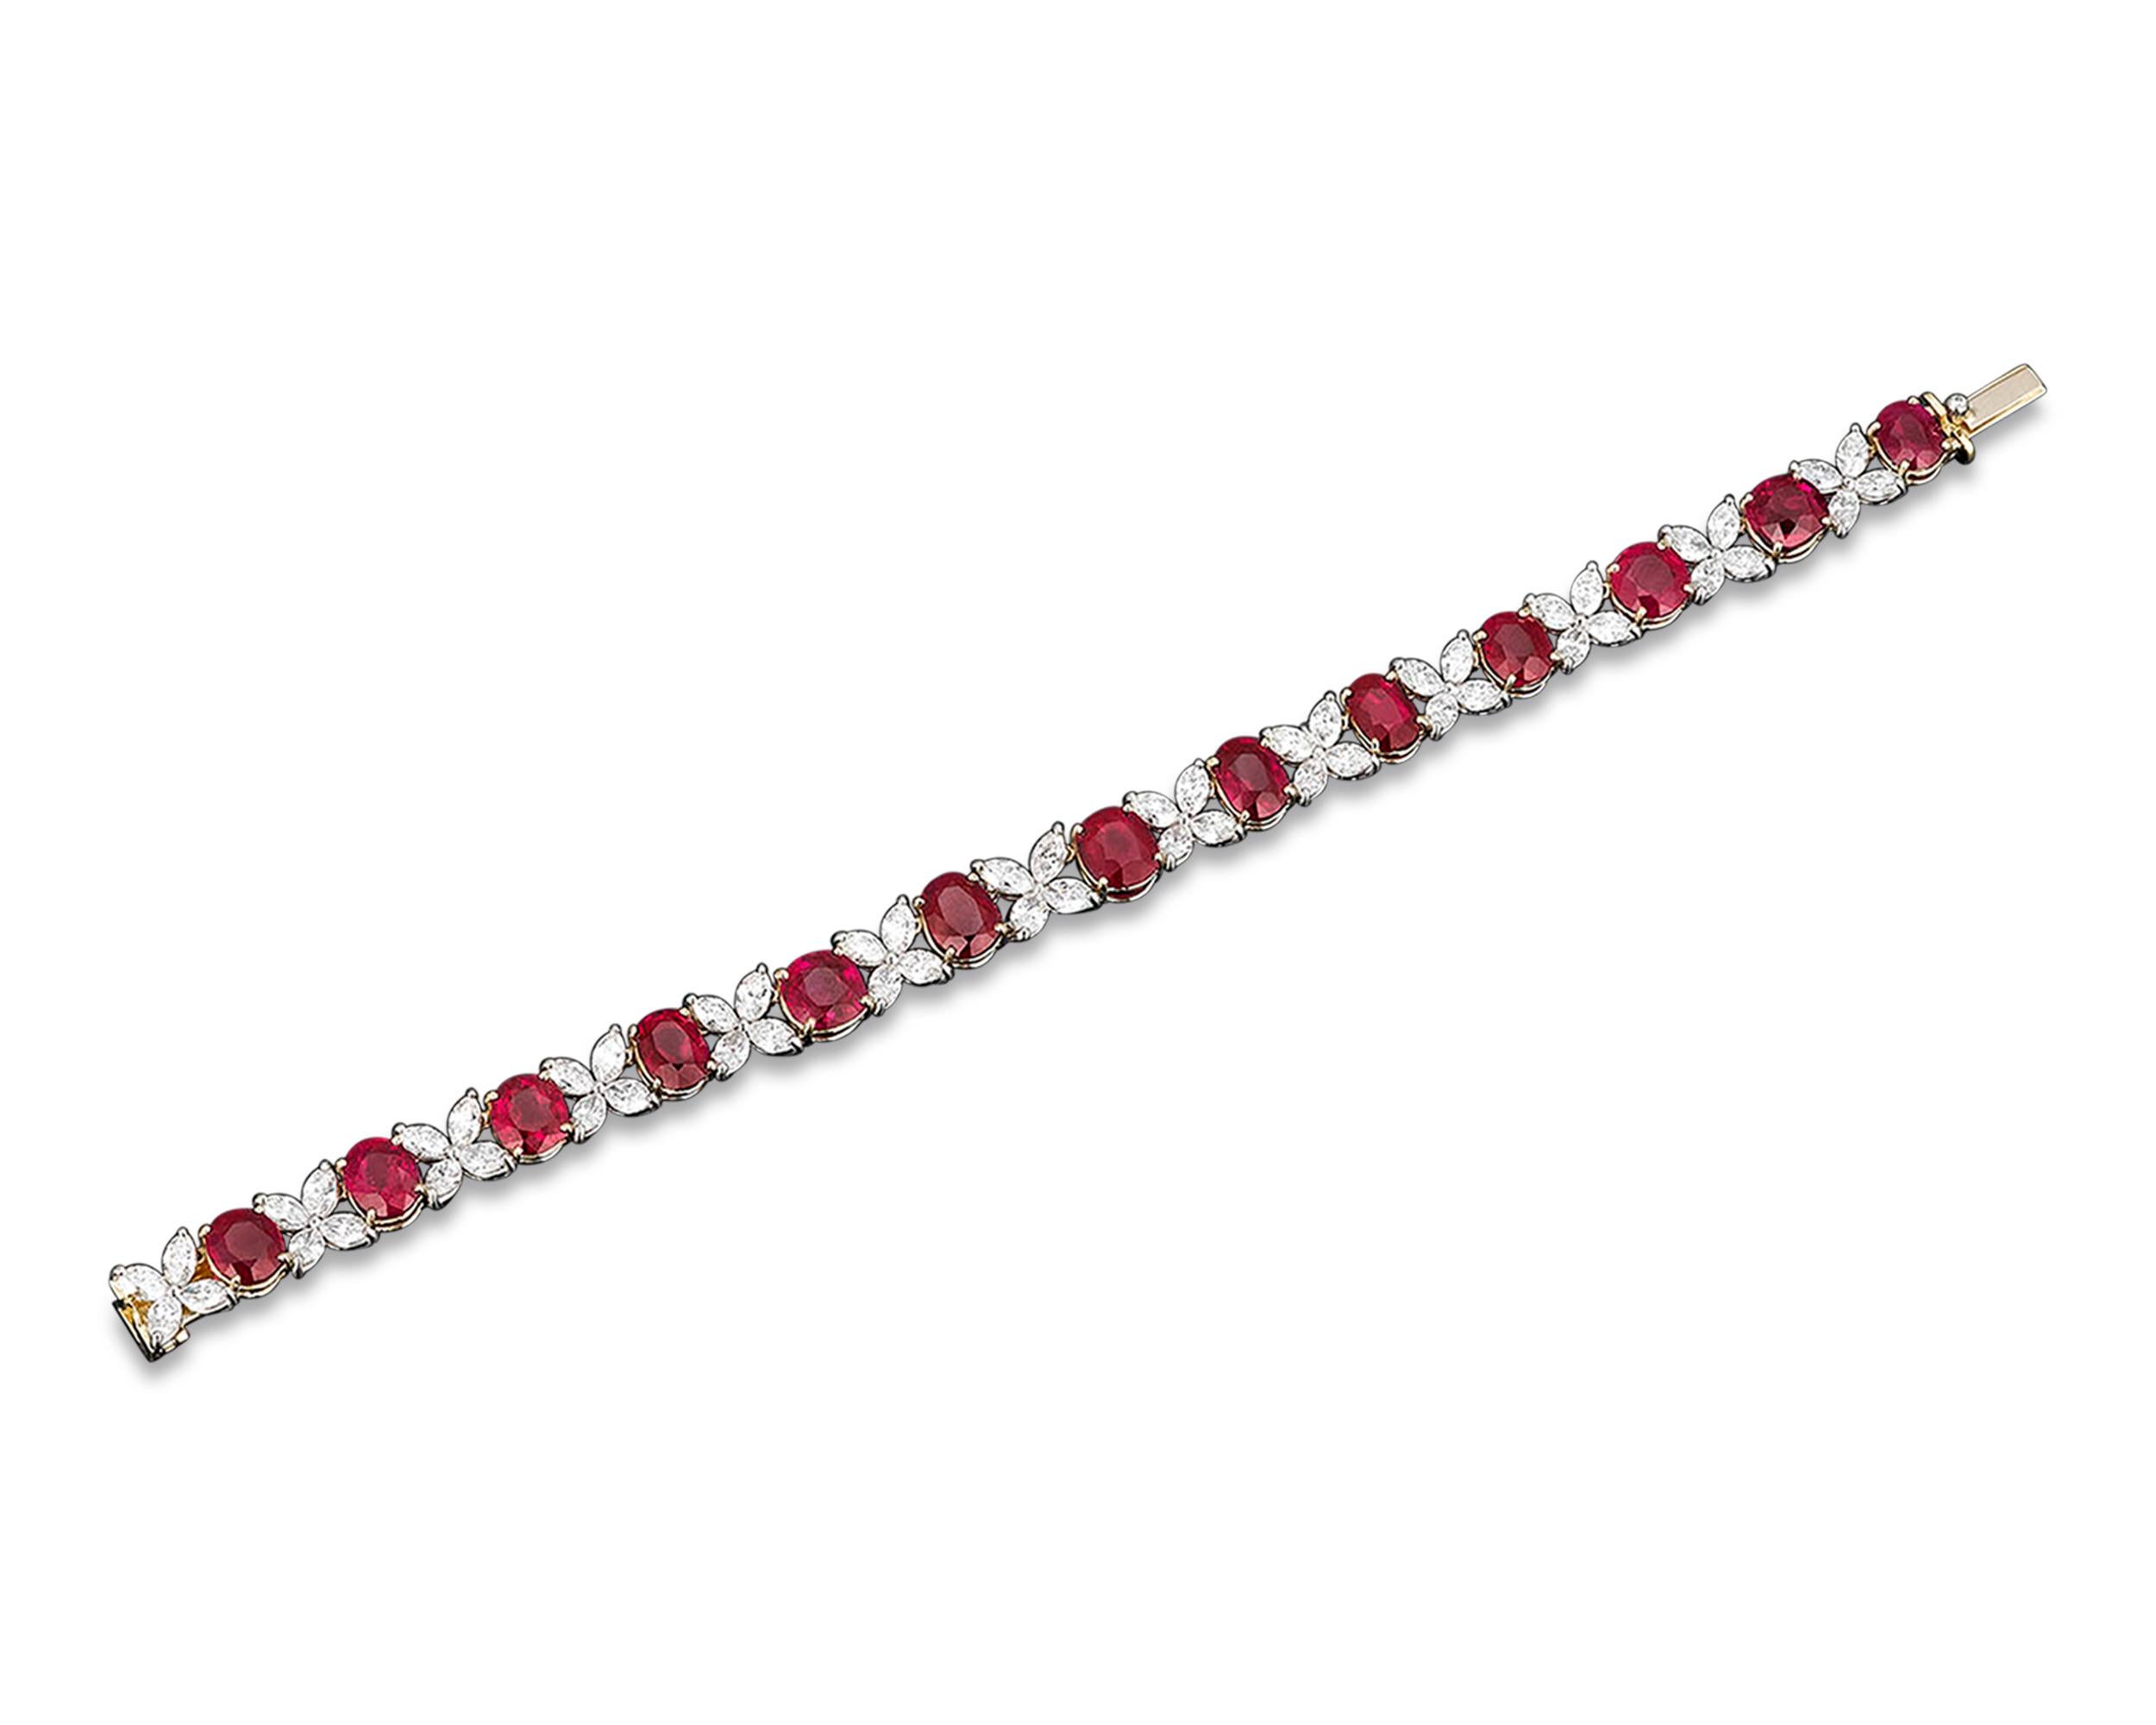 This spectacular bracelet showcases 13 rare and desirable untreated Burma rubies of exceptional quality. Weighing 21.16 total carats, these rich crimson gemstones exhibit the majestic “pigeon-blood” red hue for which the best Burma rubies are